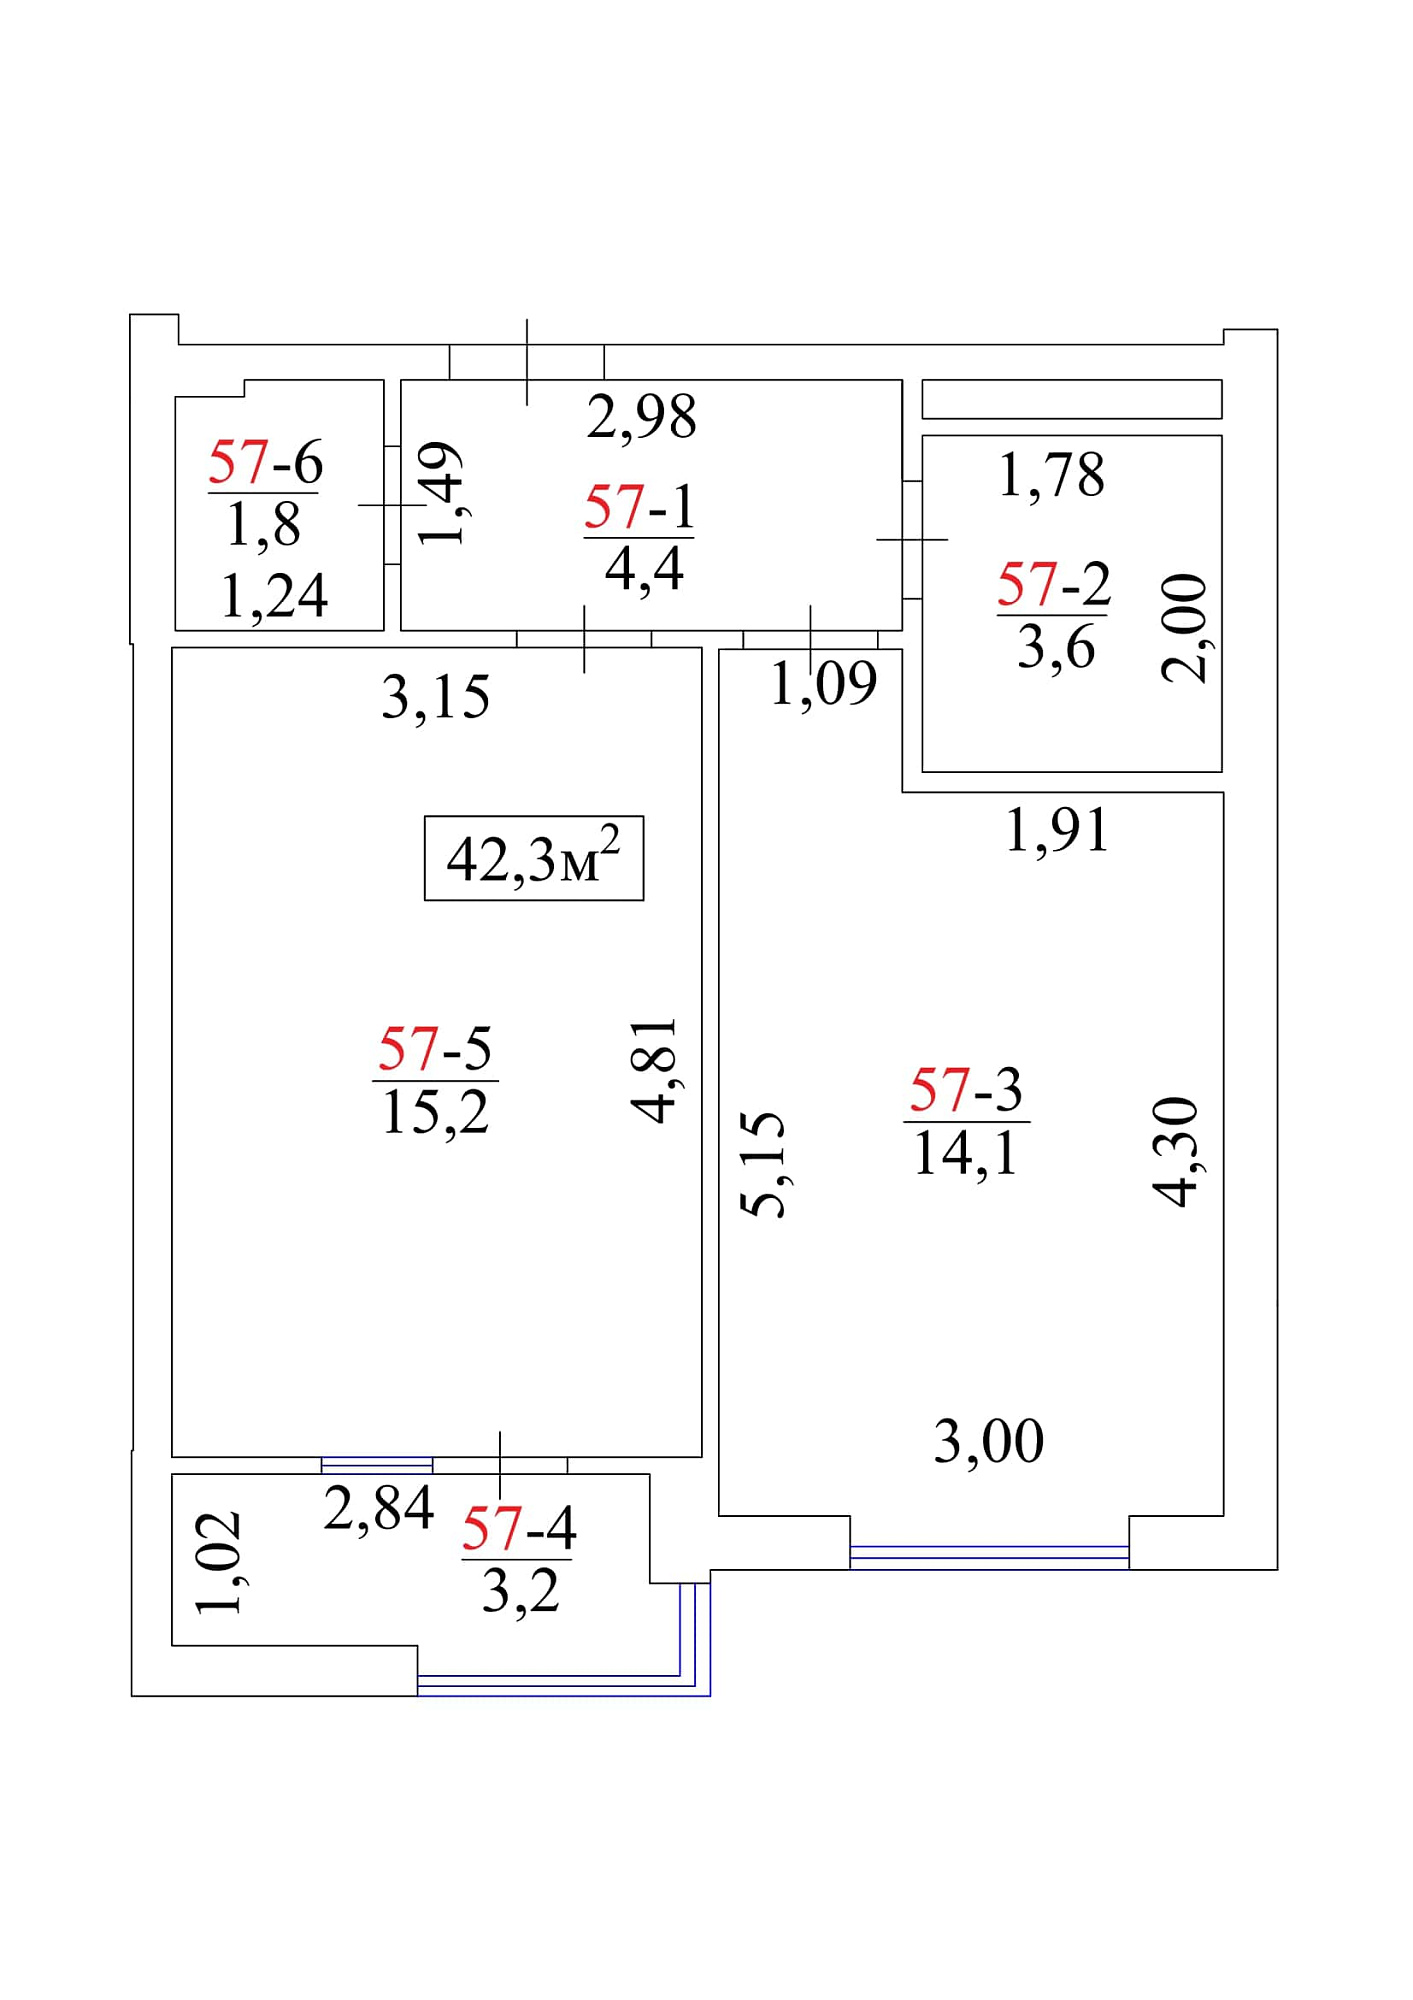 Planning 1-rm flats area 42.3m2, AB-01-07/00054.